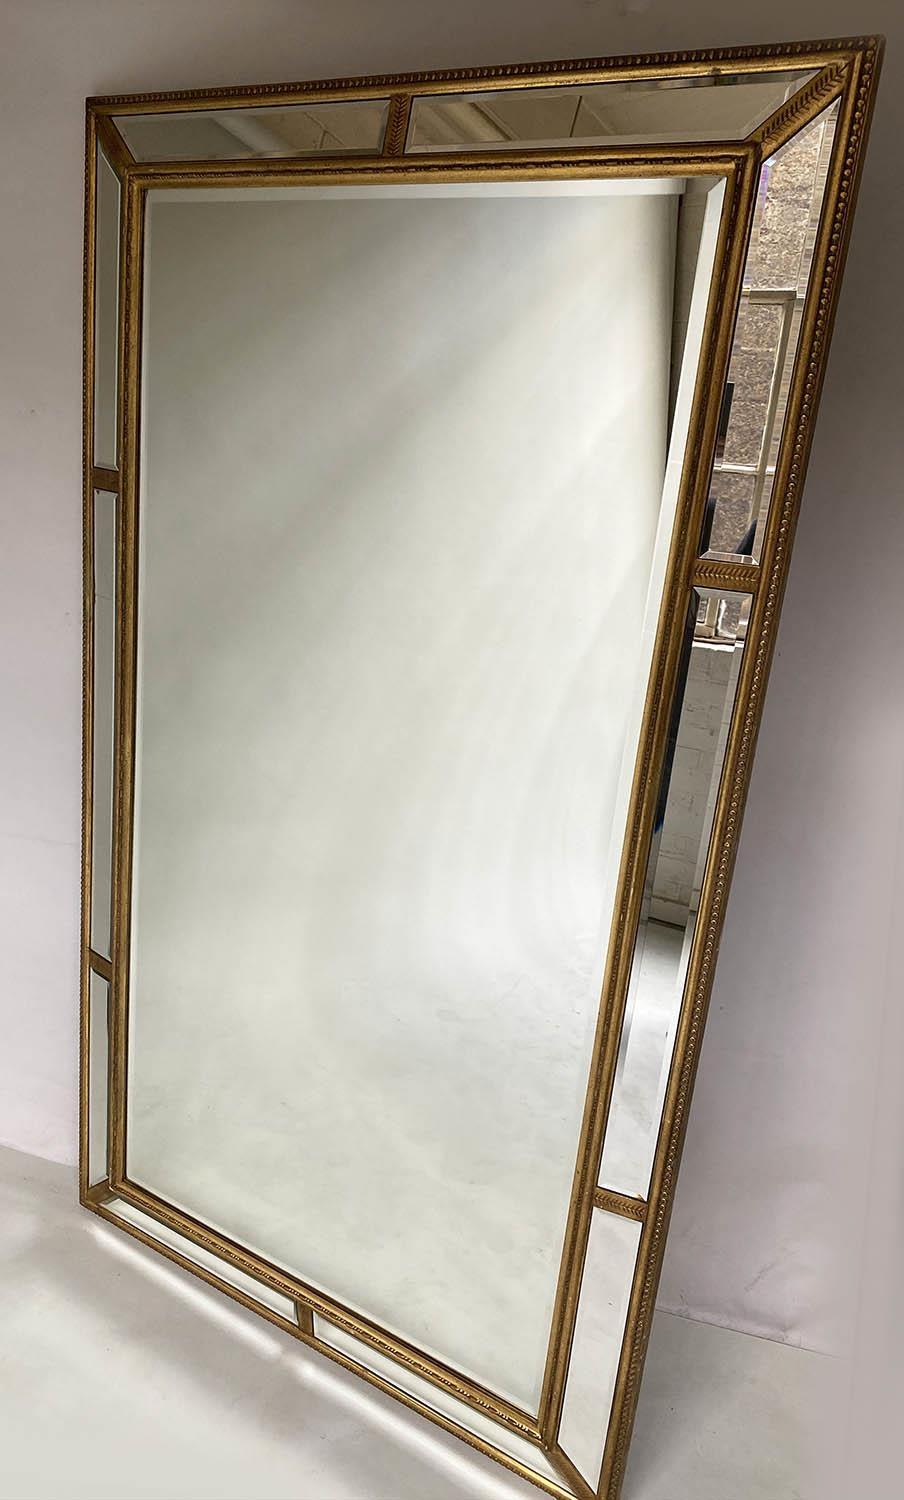 WALL MIRROR, Georgian style beaded giltwood with marginal and bevelled plates throughout, 193cm H